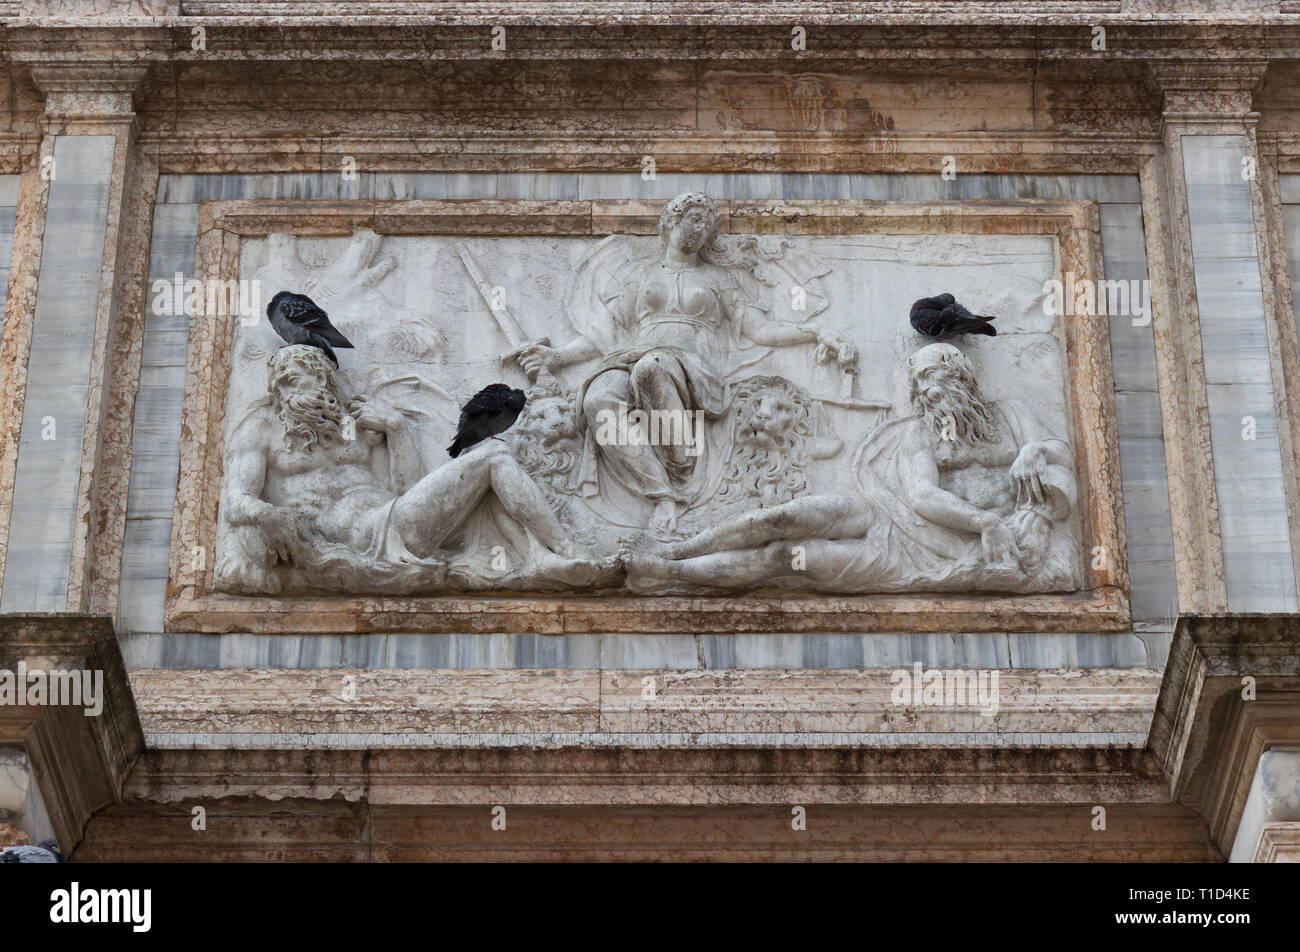 Sculpture at the base of the bell tower of San Marco, Venice Stock Photo